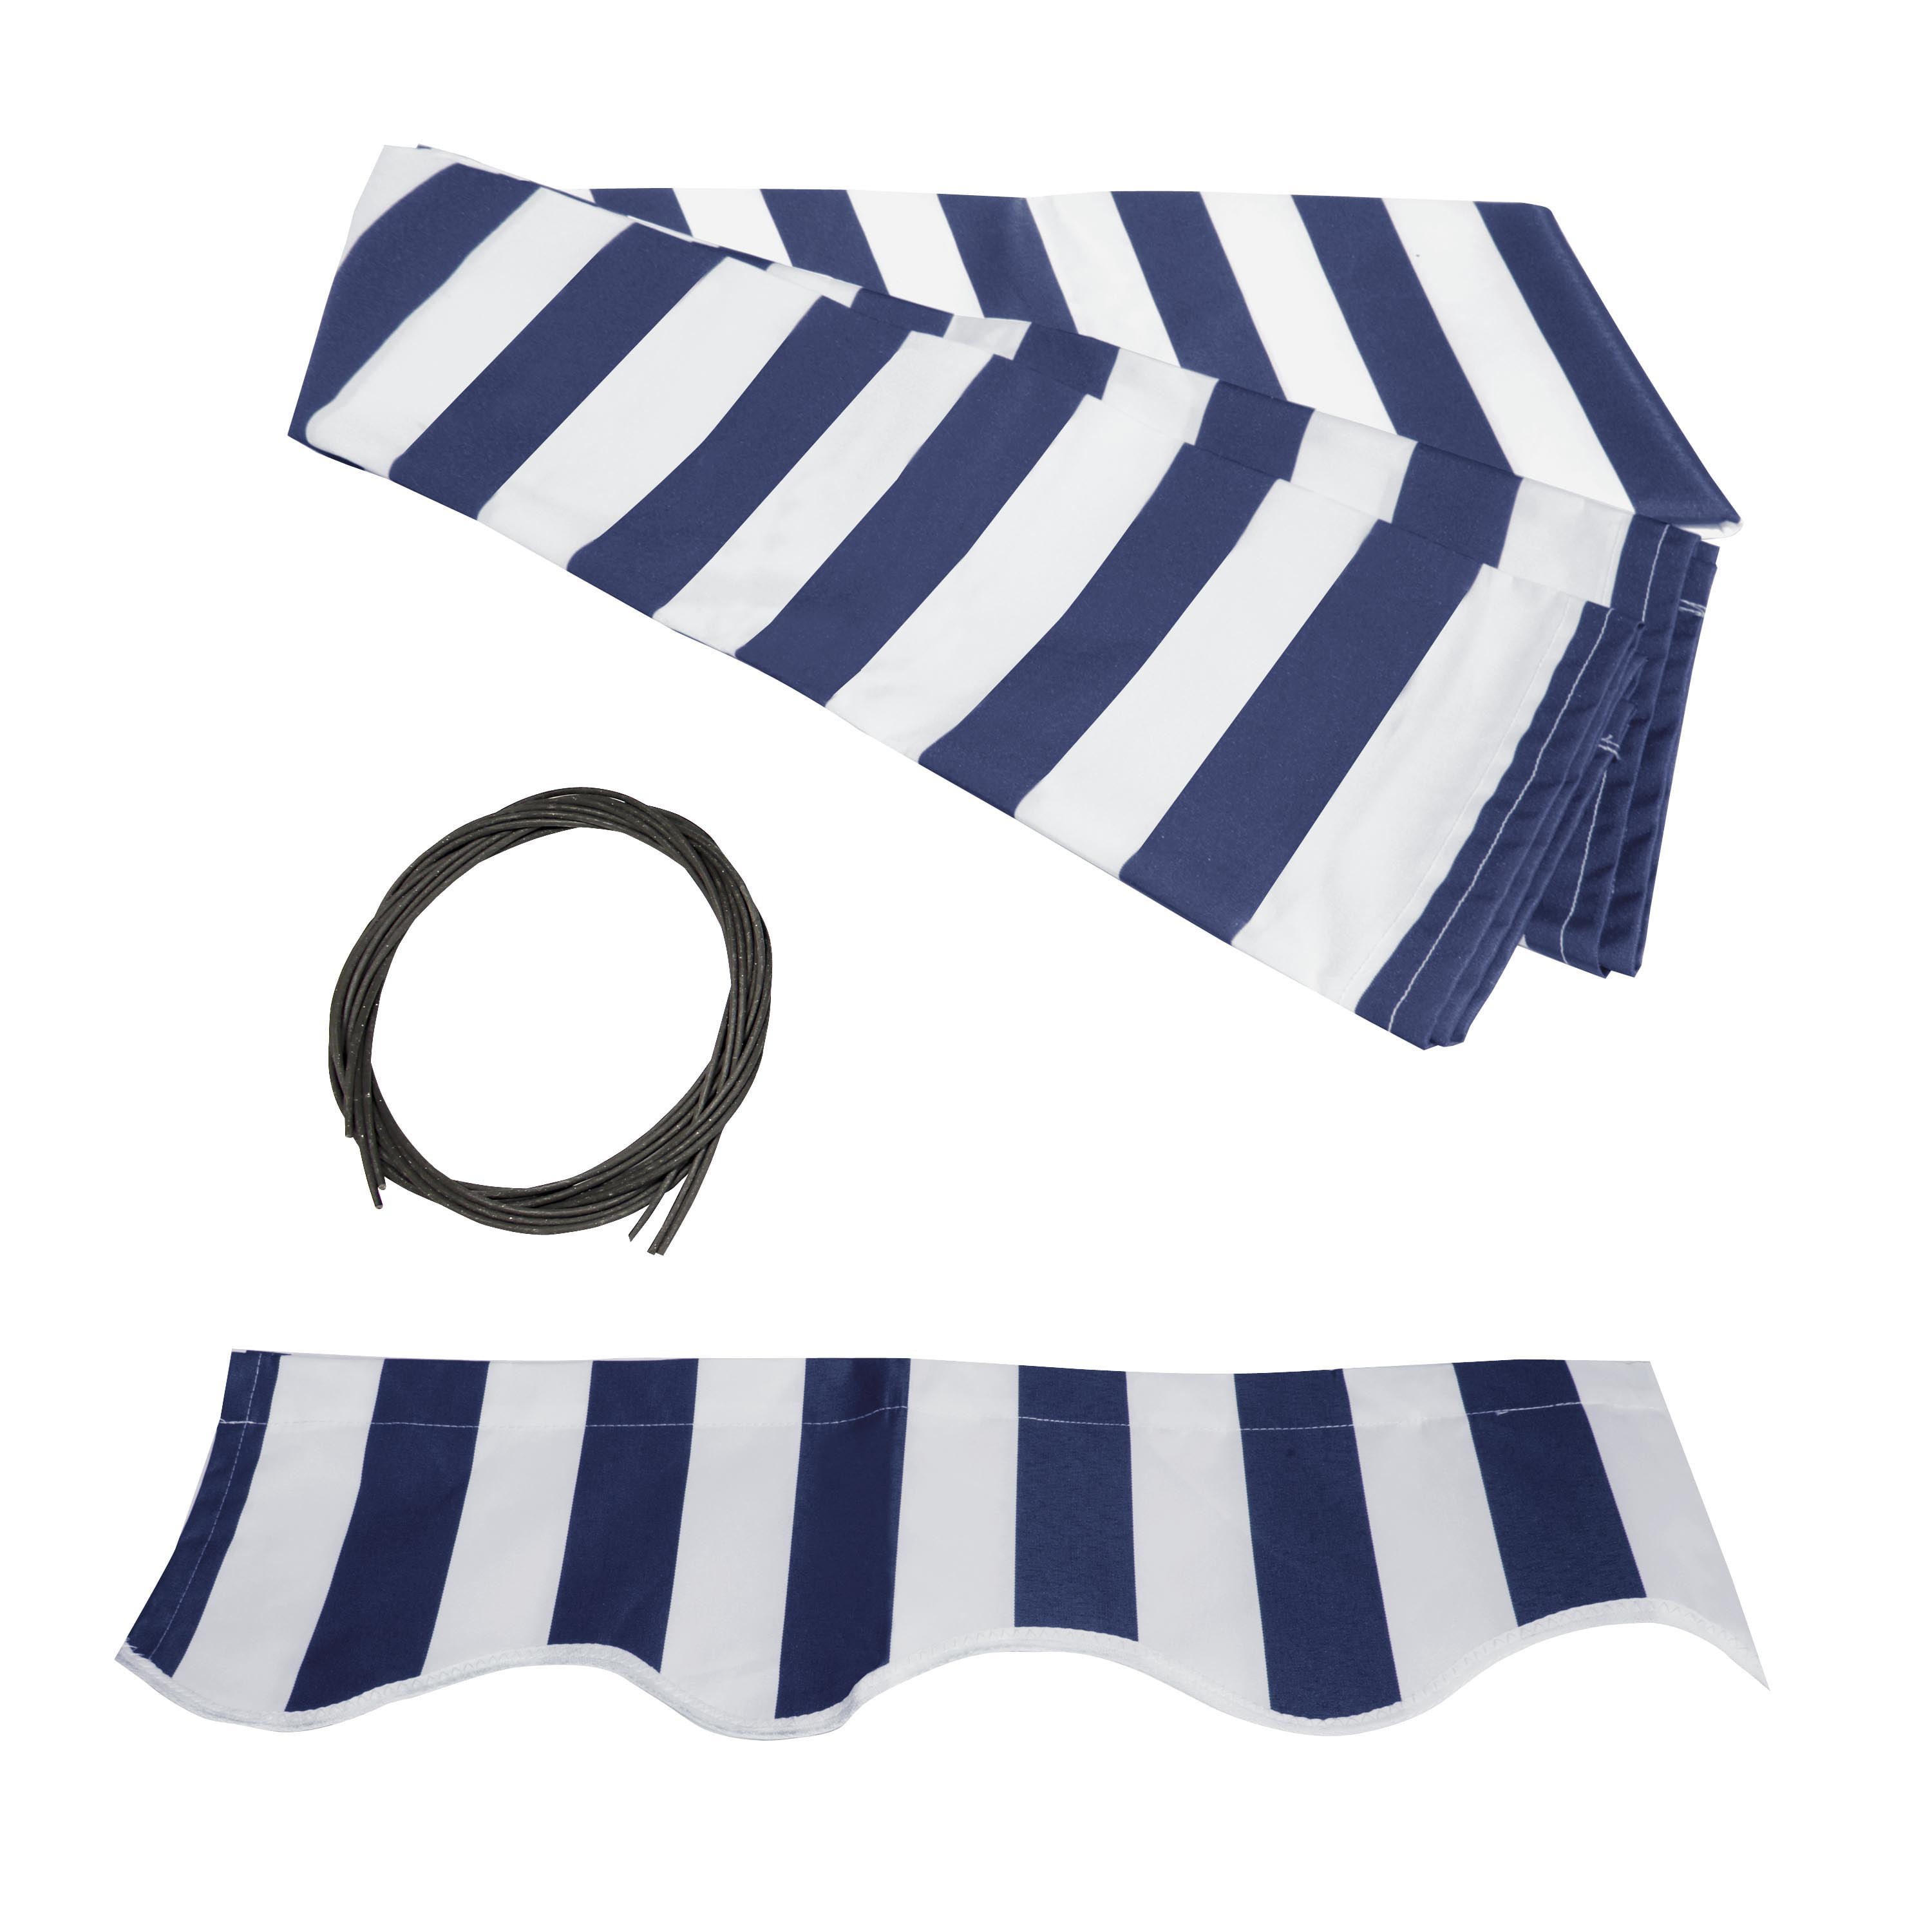 ALEKO Fabric Replacement For 12x10 Ft Retractable Awning Blue/White Color 